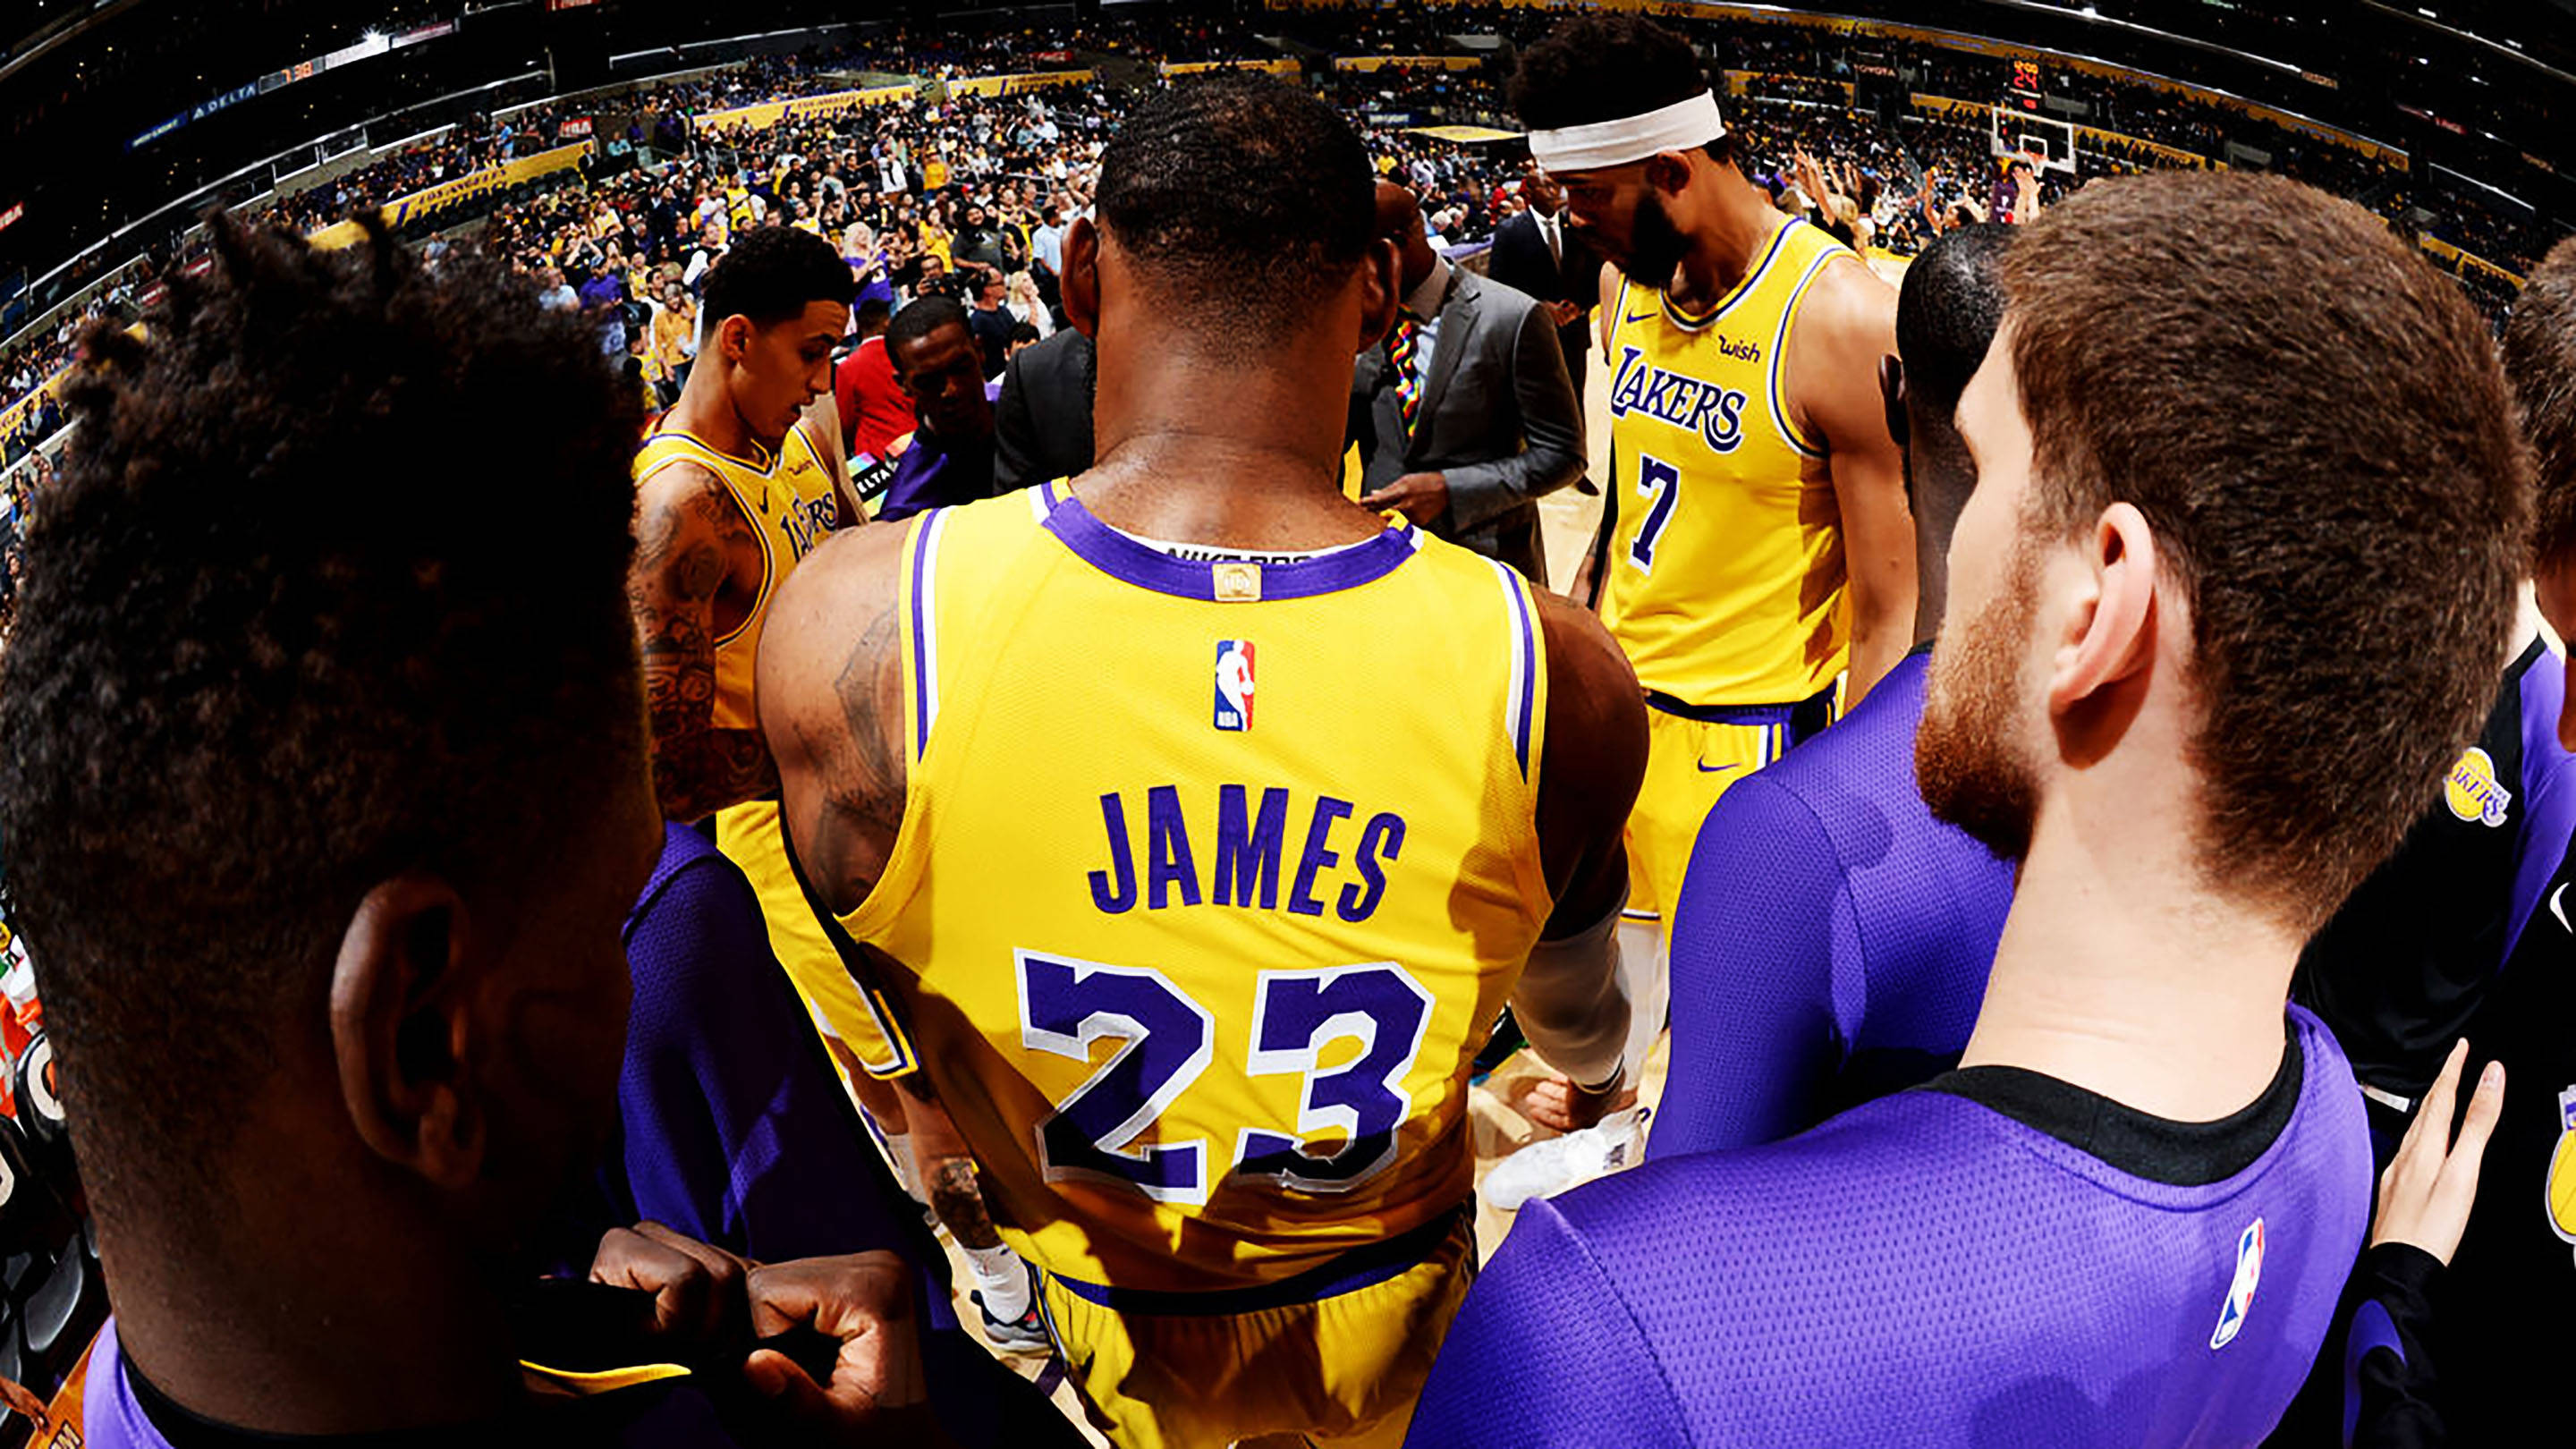 LeBron James and the NBA's Los Angeles Lakers